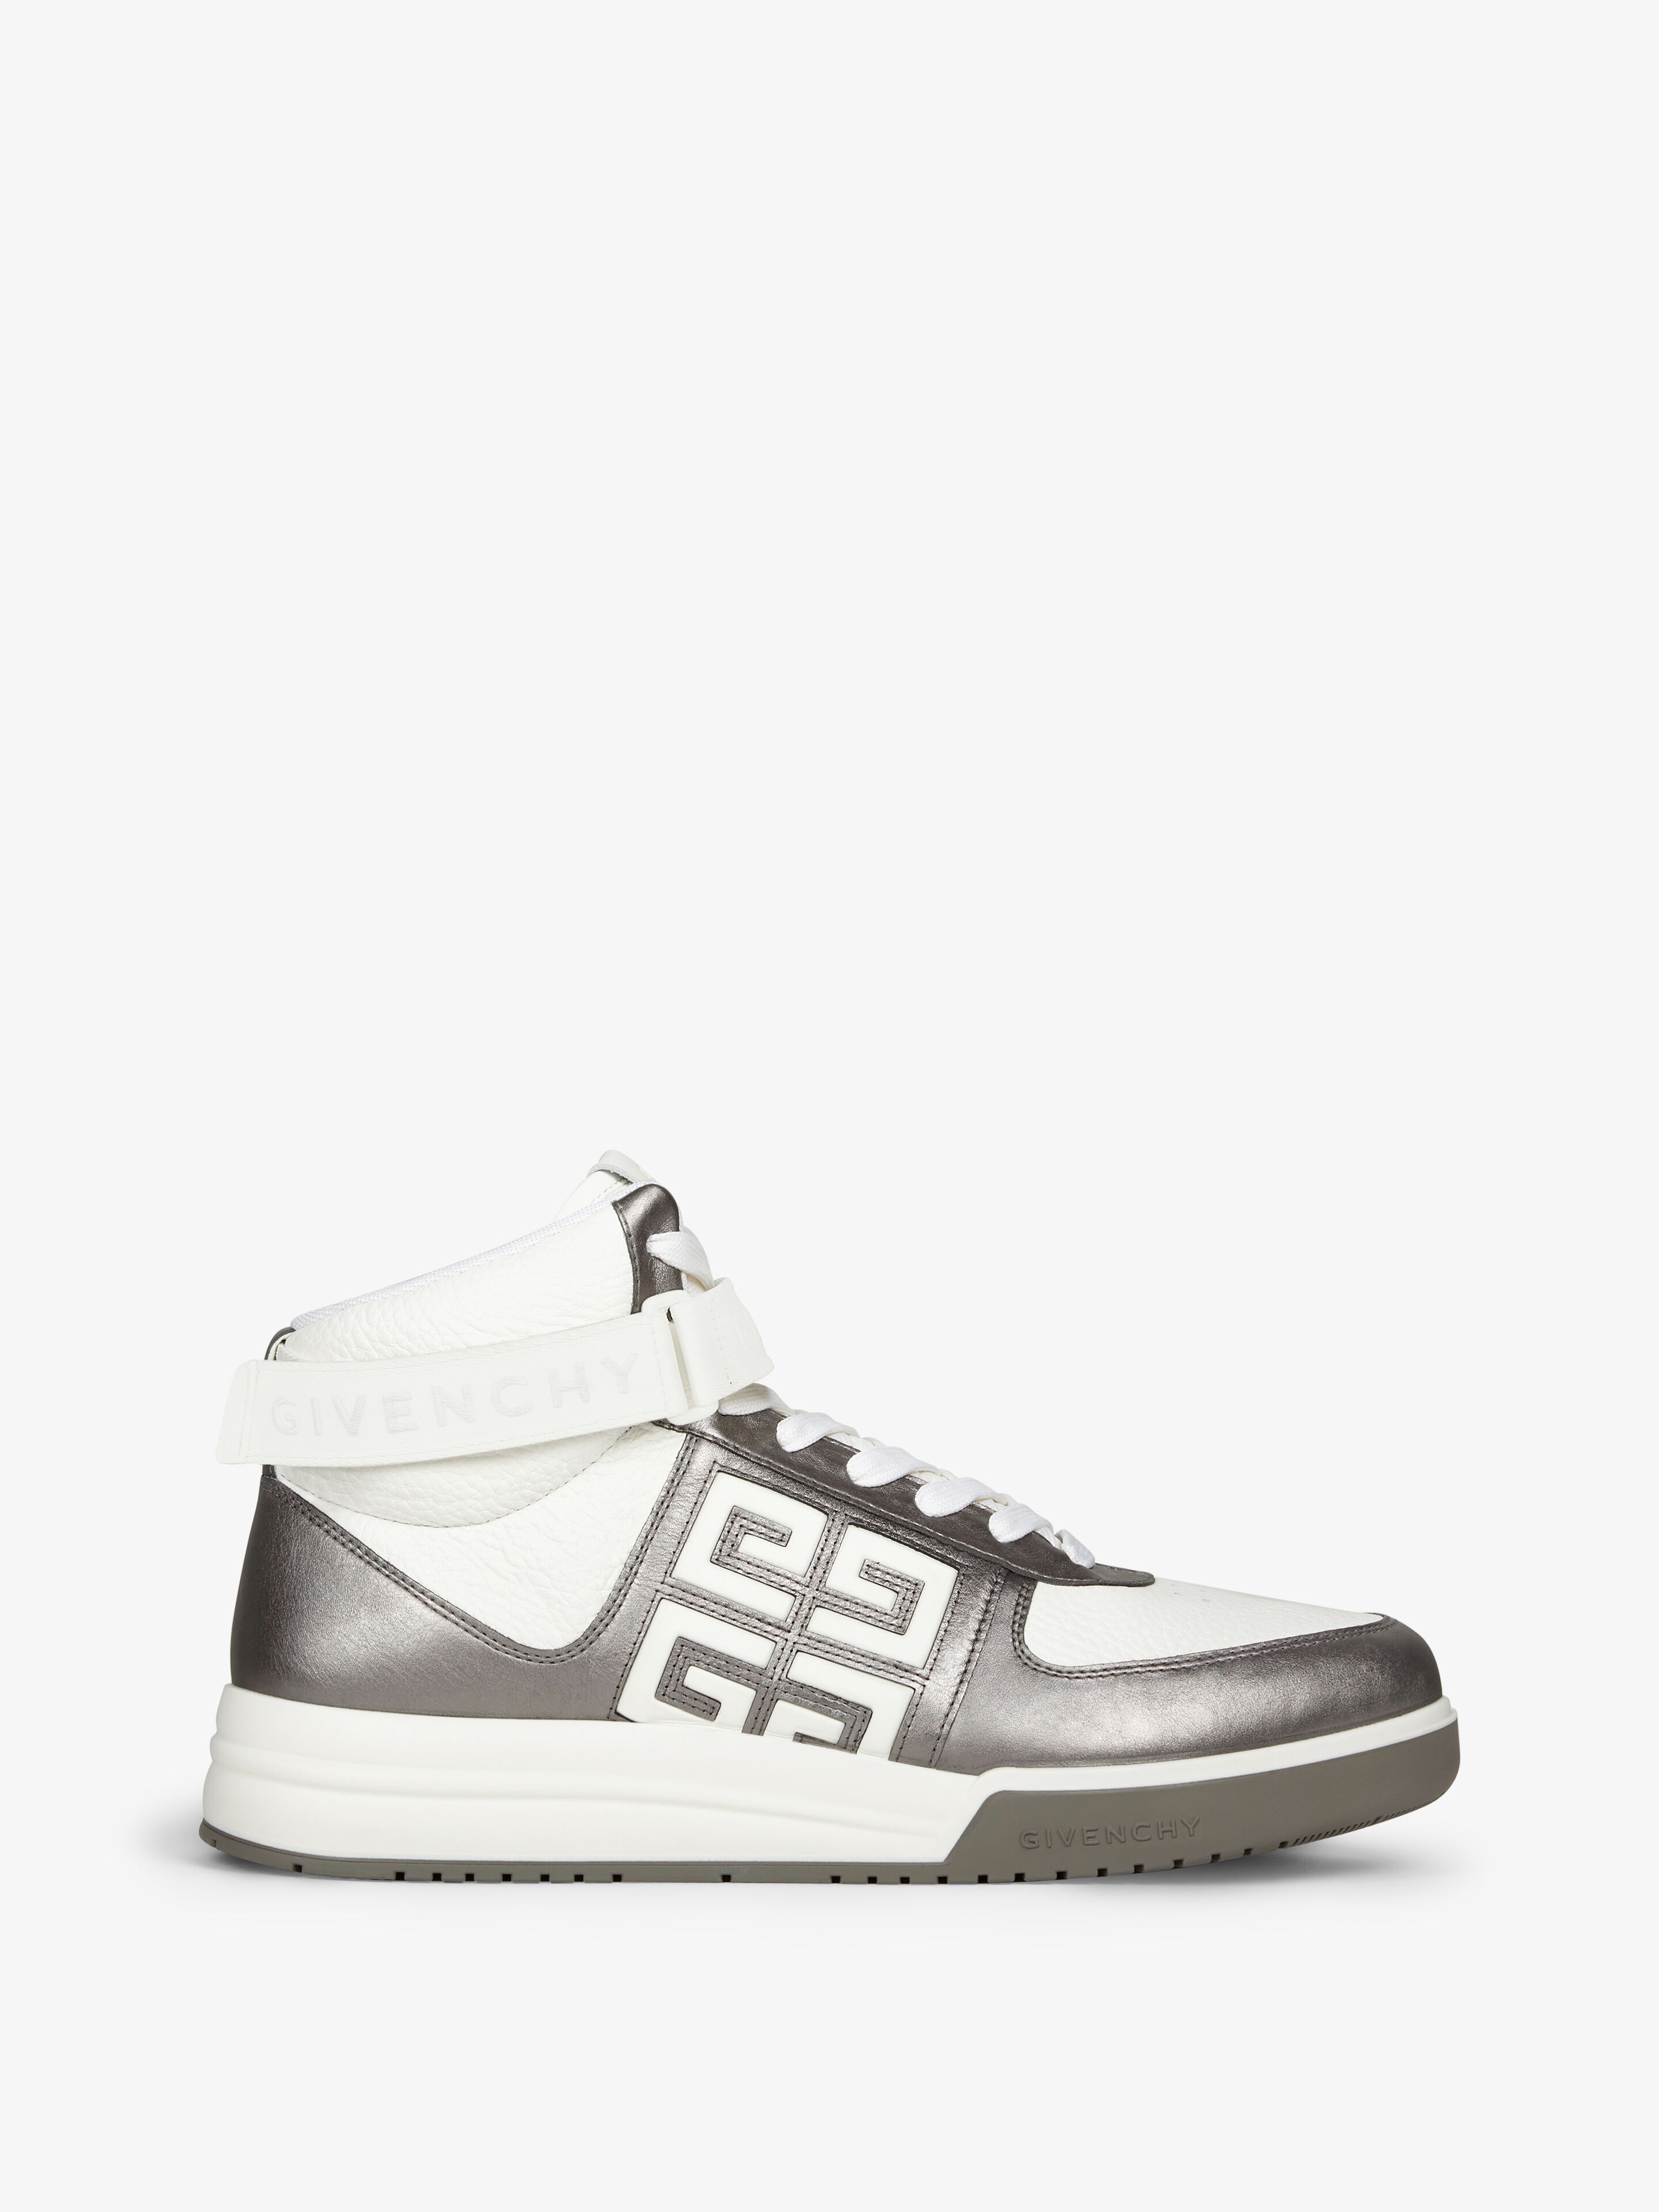 Givenchy Men's G4 High Top Sneakers In Laminated Leather In Silvery Grey